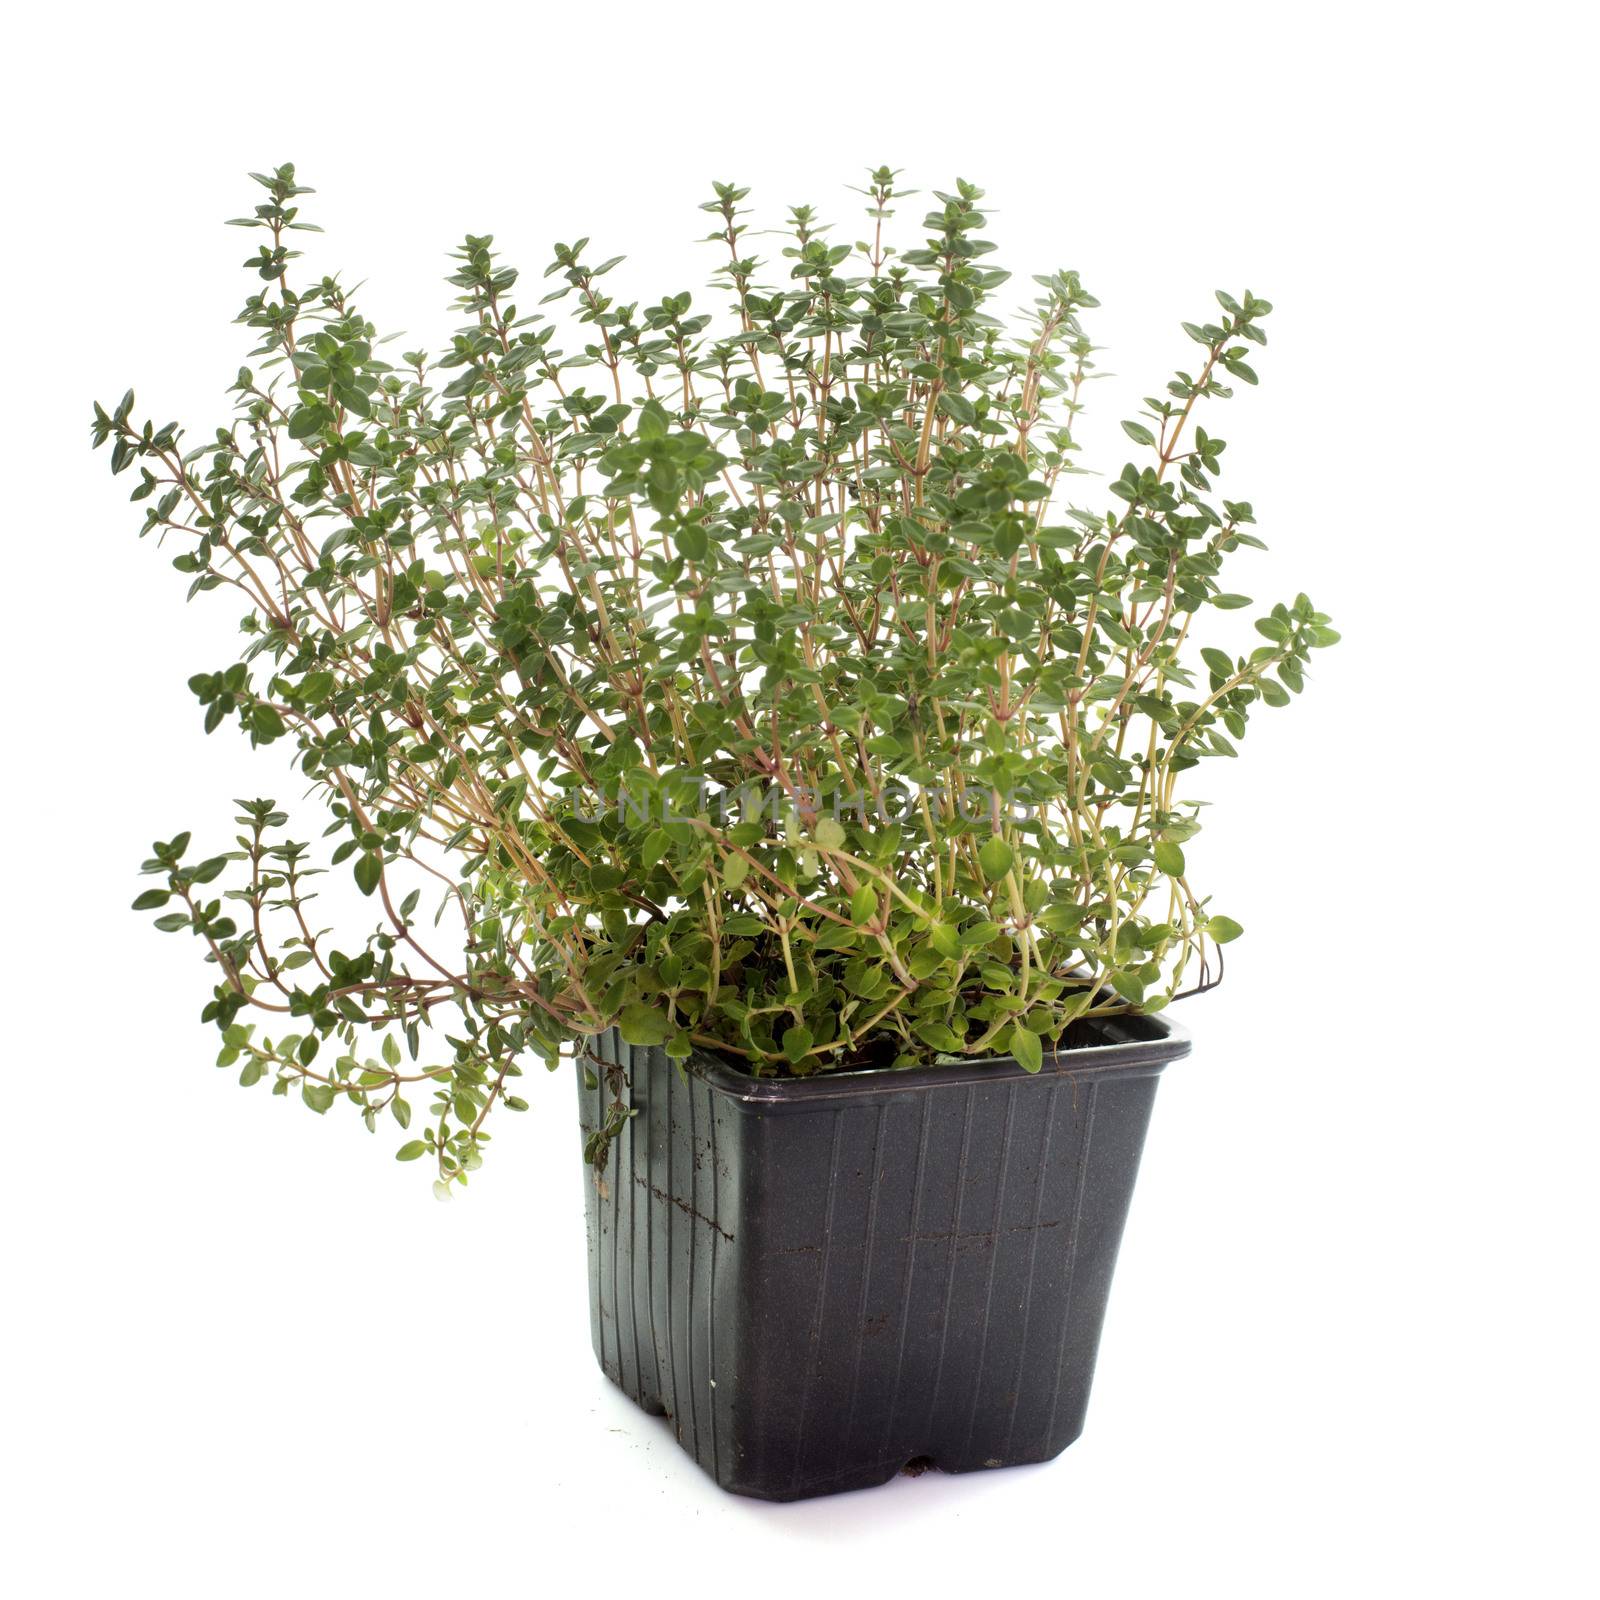 Lemon thyme in pot in front of white background